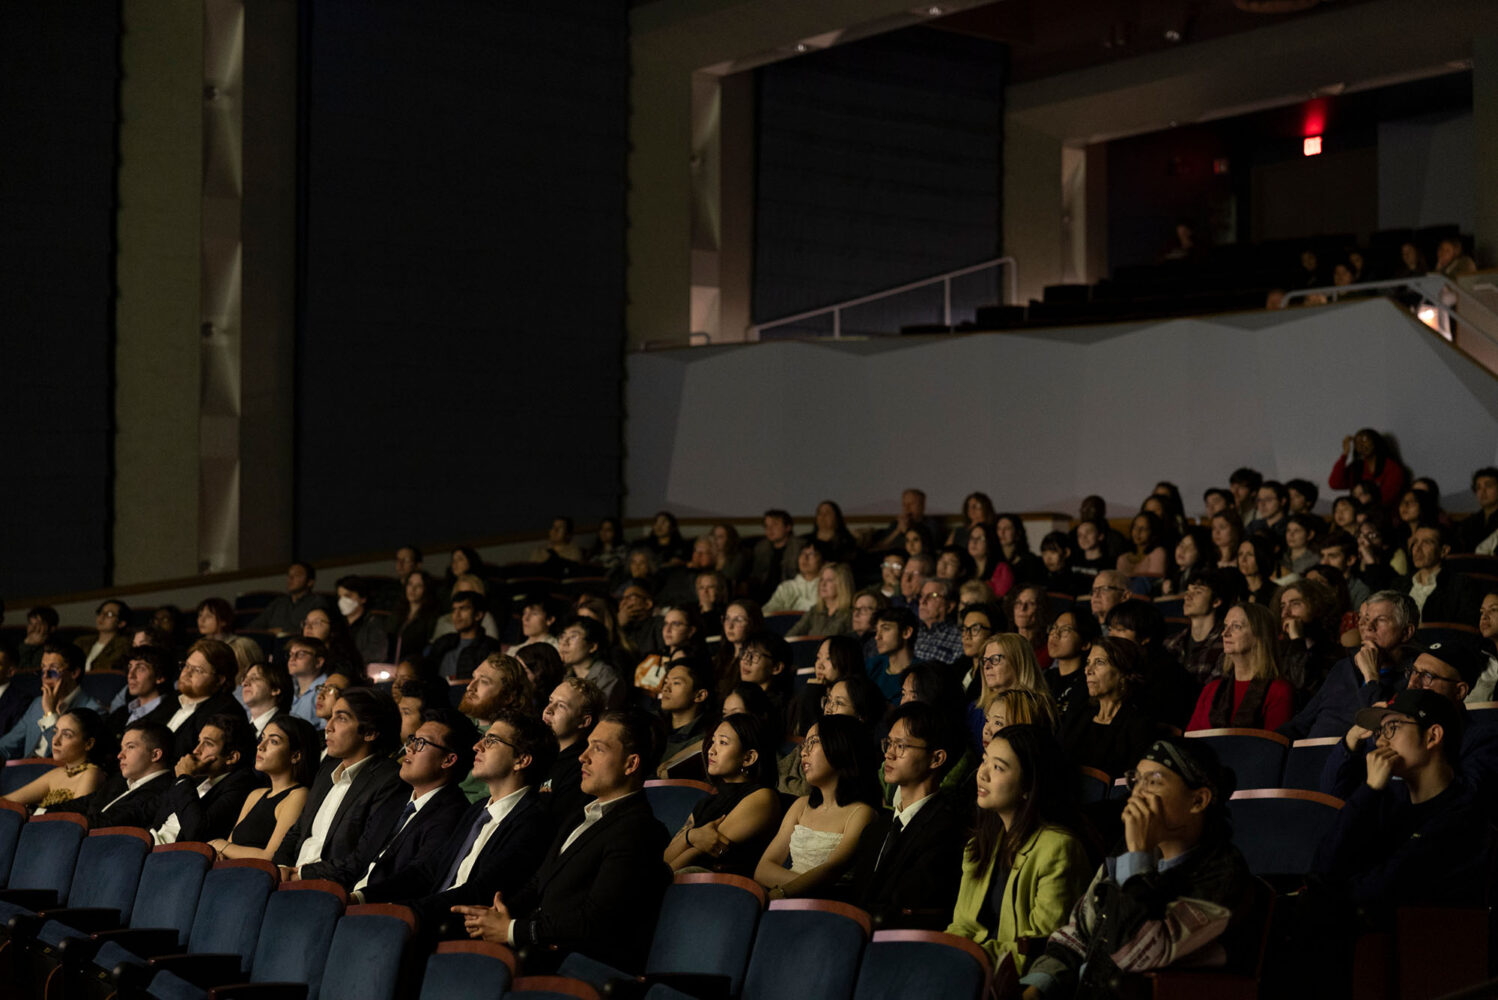 photo: A picture of a crowd seated in a theater